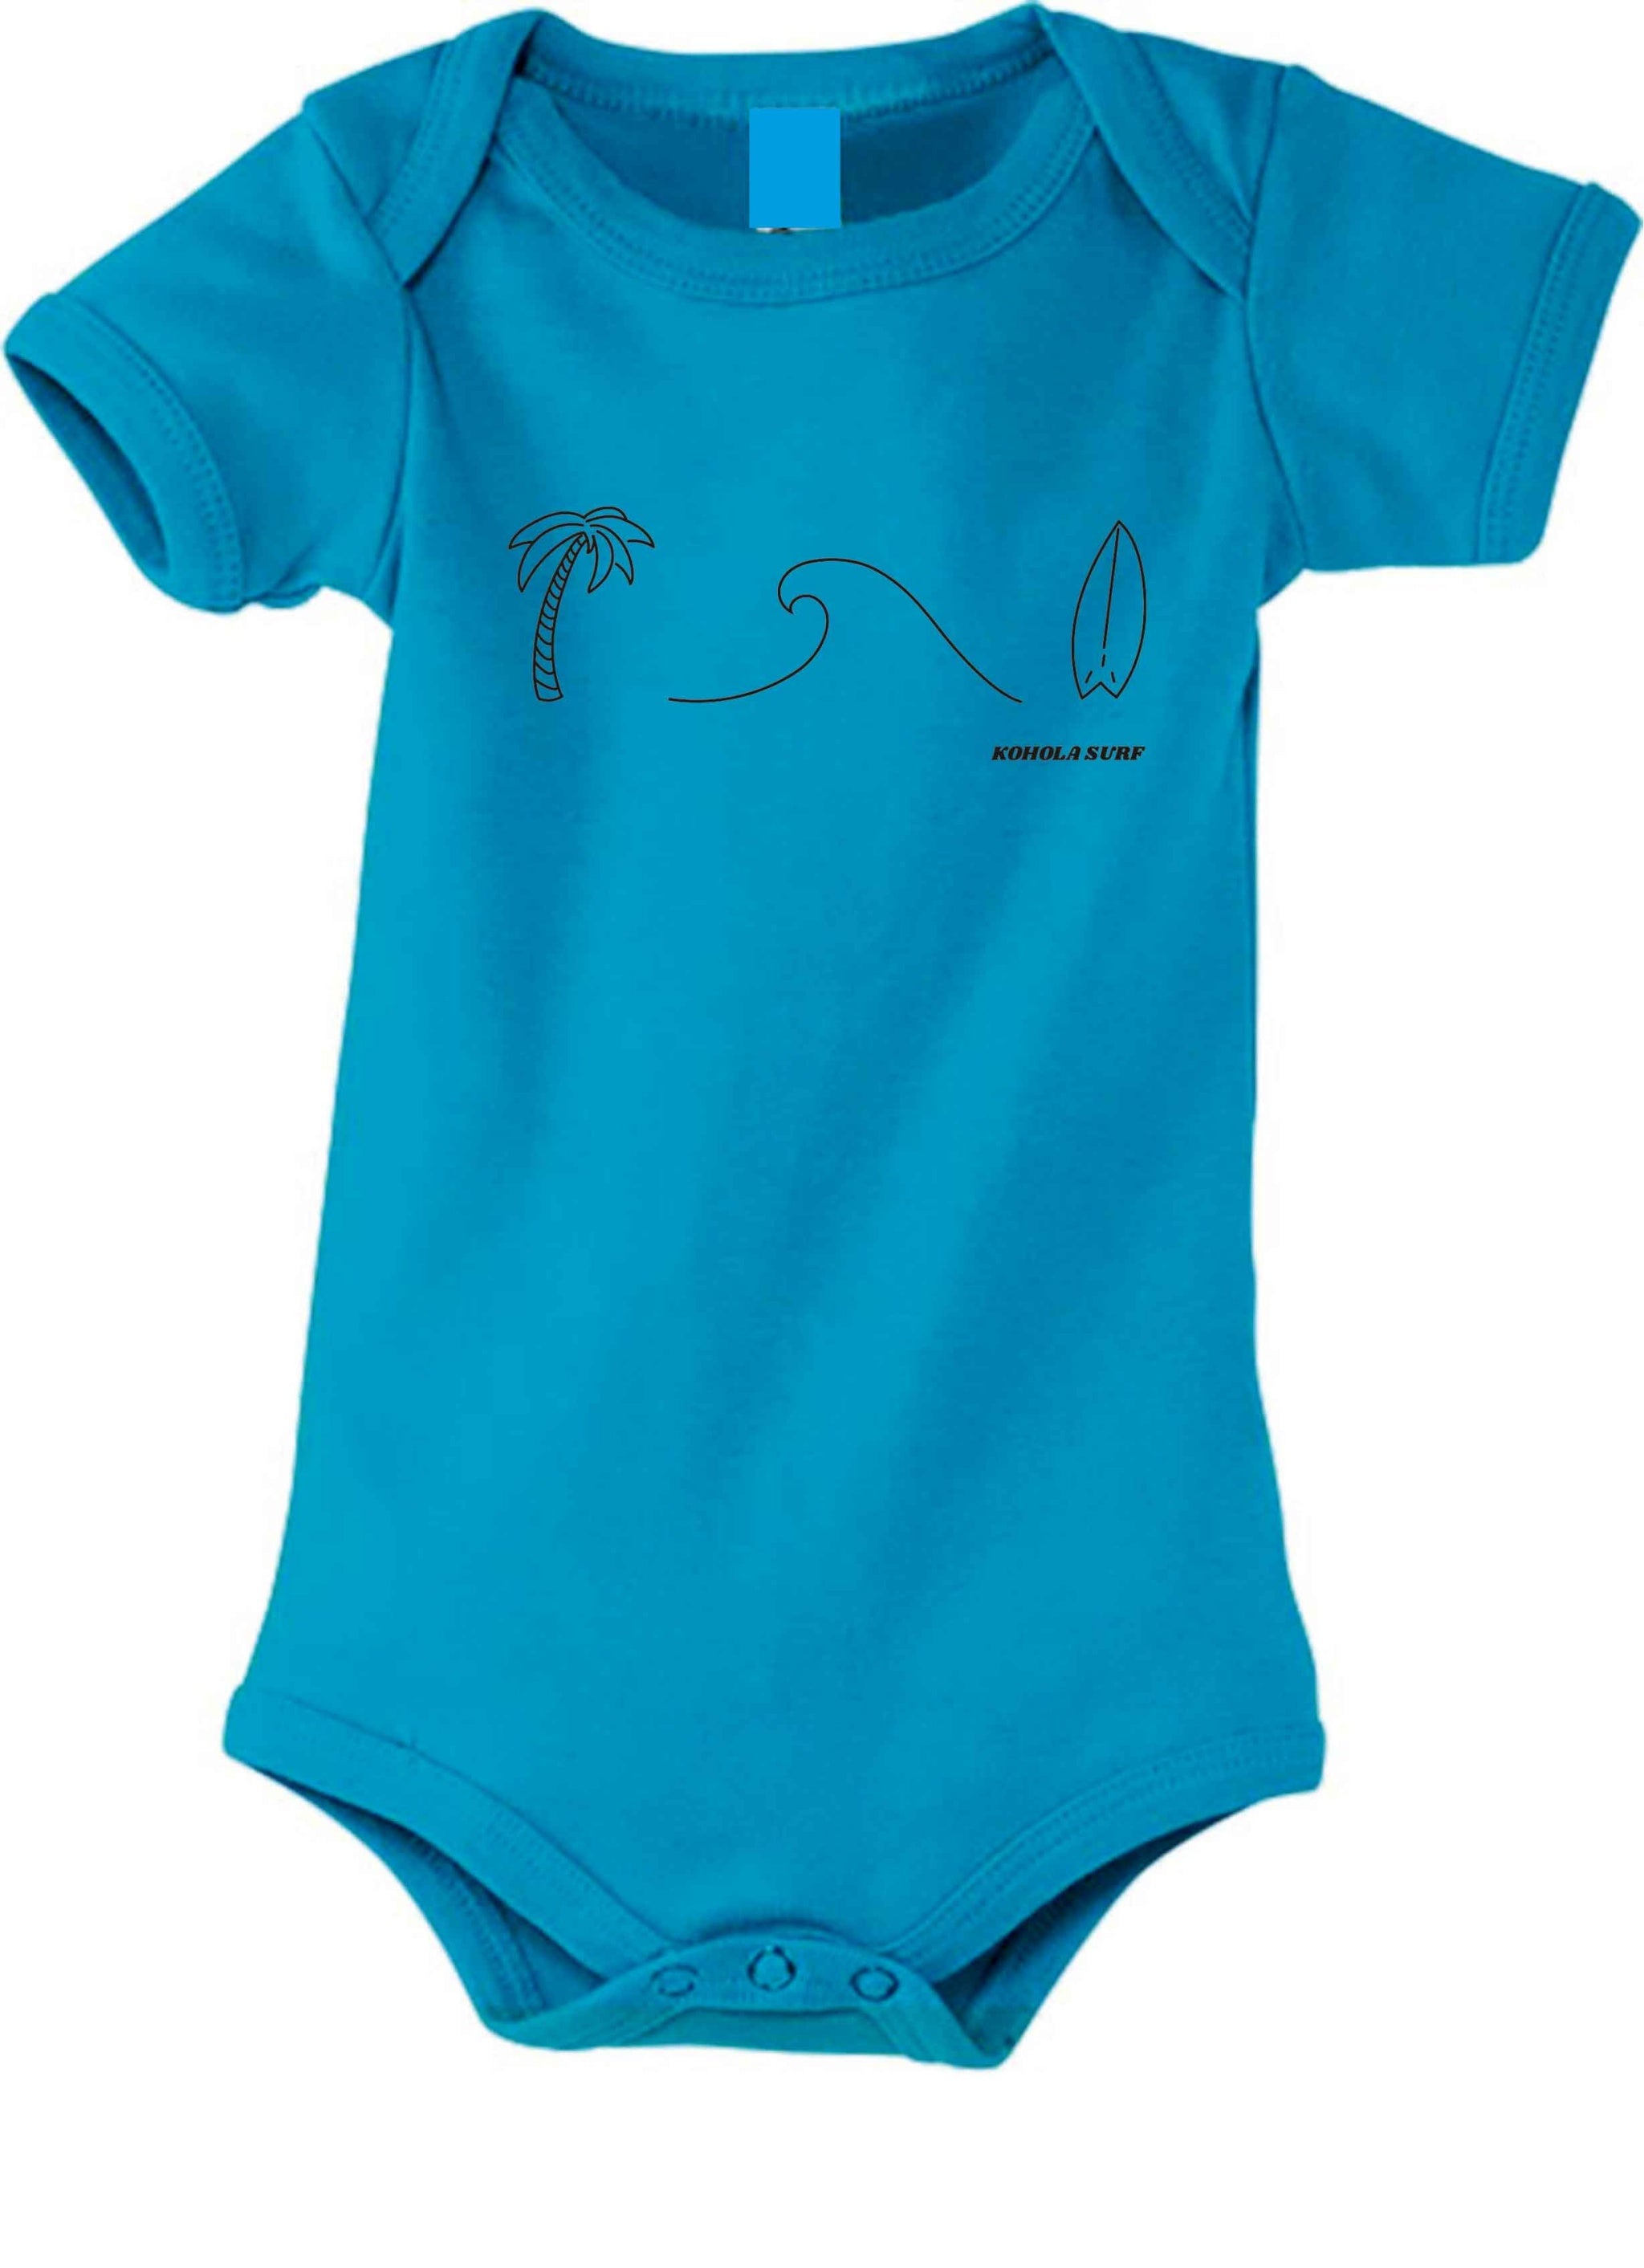 Palm Trees & Waves Baby Short-Sleeved Body